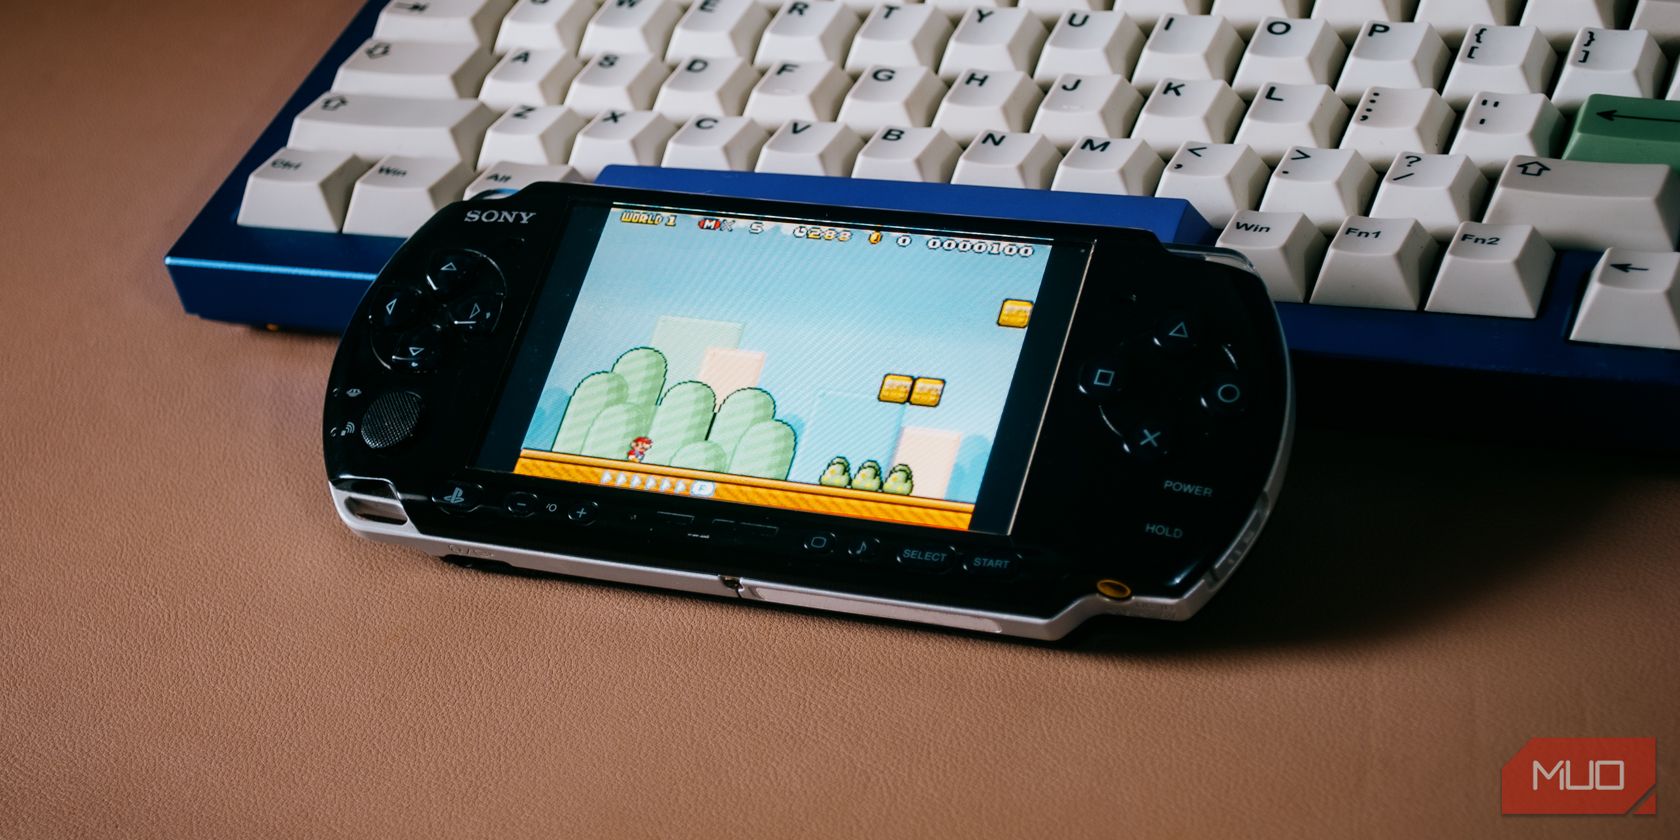 PSP on a keyboard playing Mario